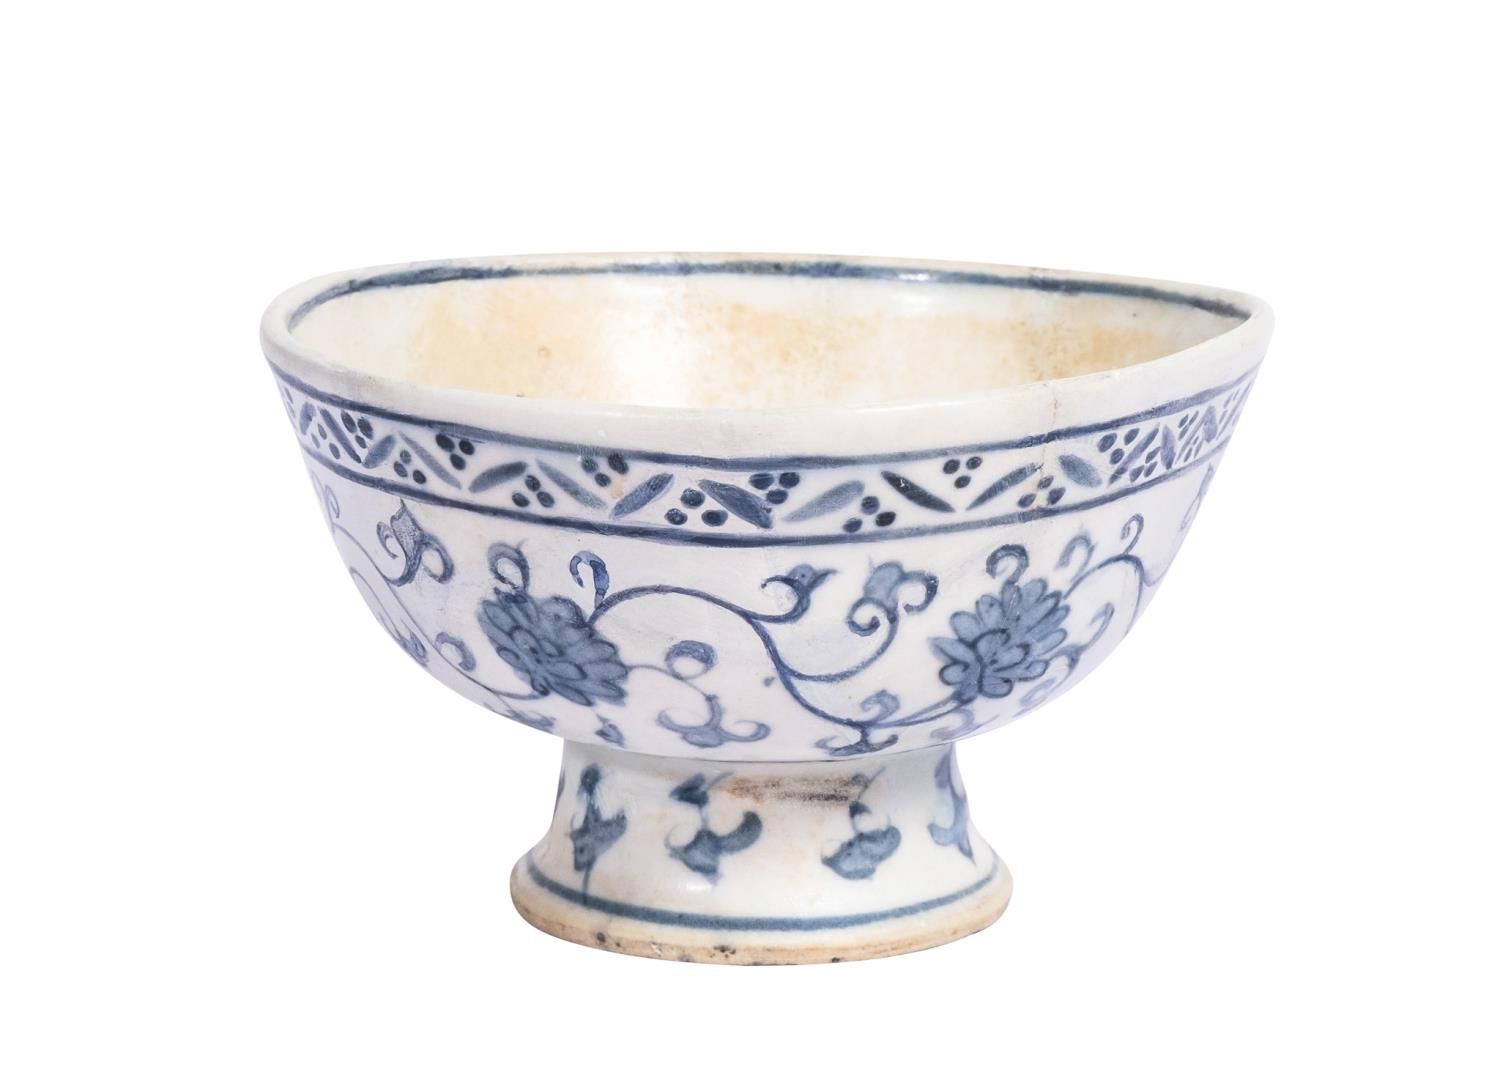 Null A EARLY FOOTED IZNIK BLUE & WHITE FLORAL BOWL, CIRCA 1520-1530, 16TH CENTUR&hellip;